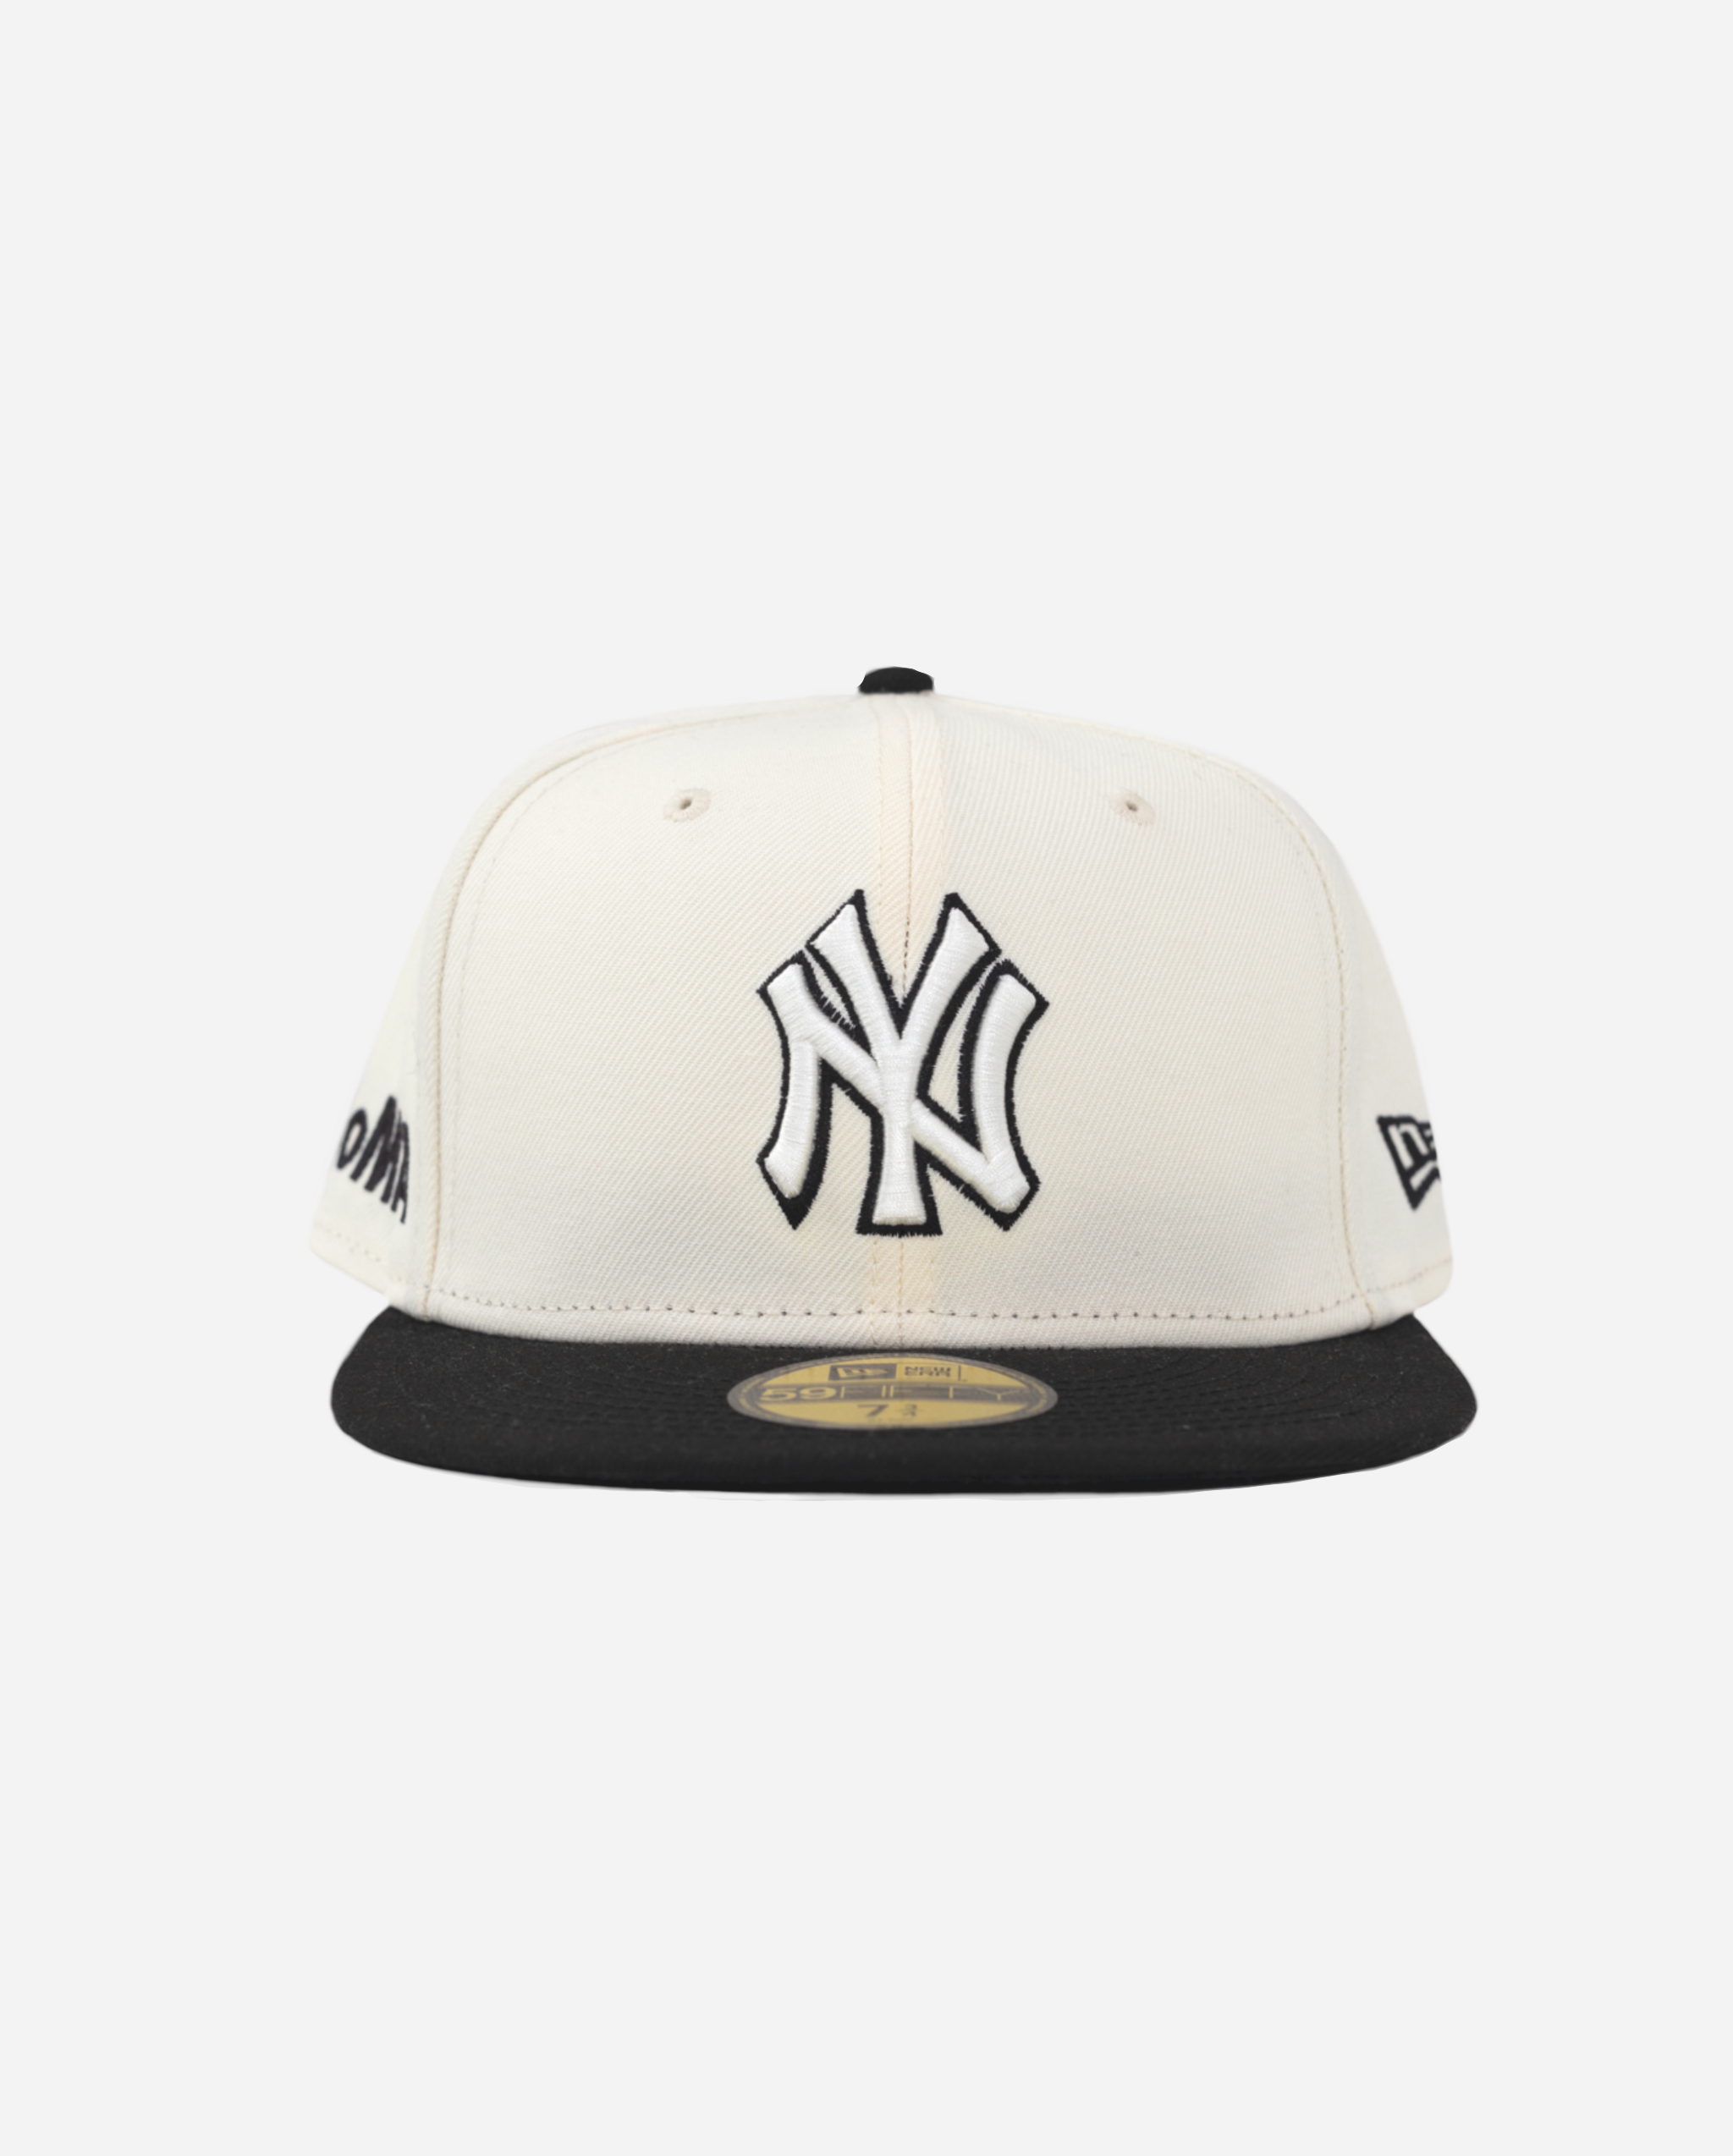 oMA NATURAL/BLACK NEW YORK YANKEES FITTED HAT (SAMPLE)